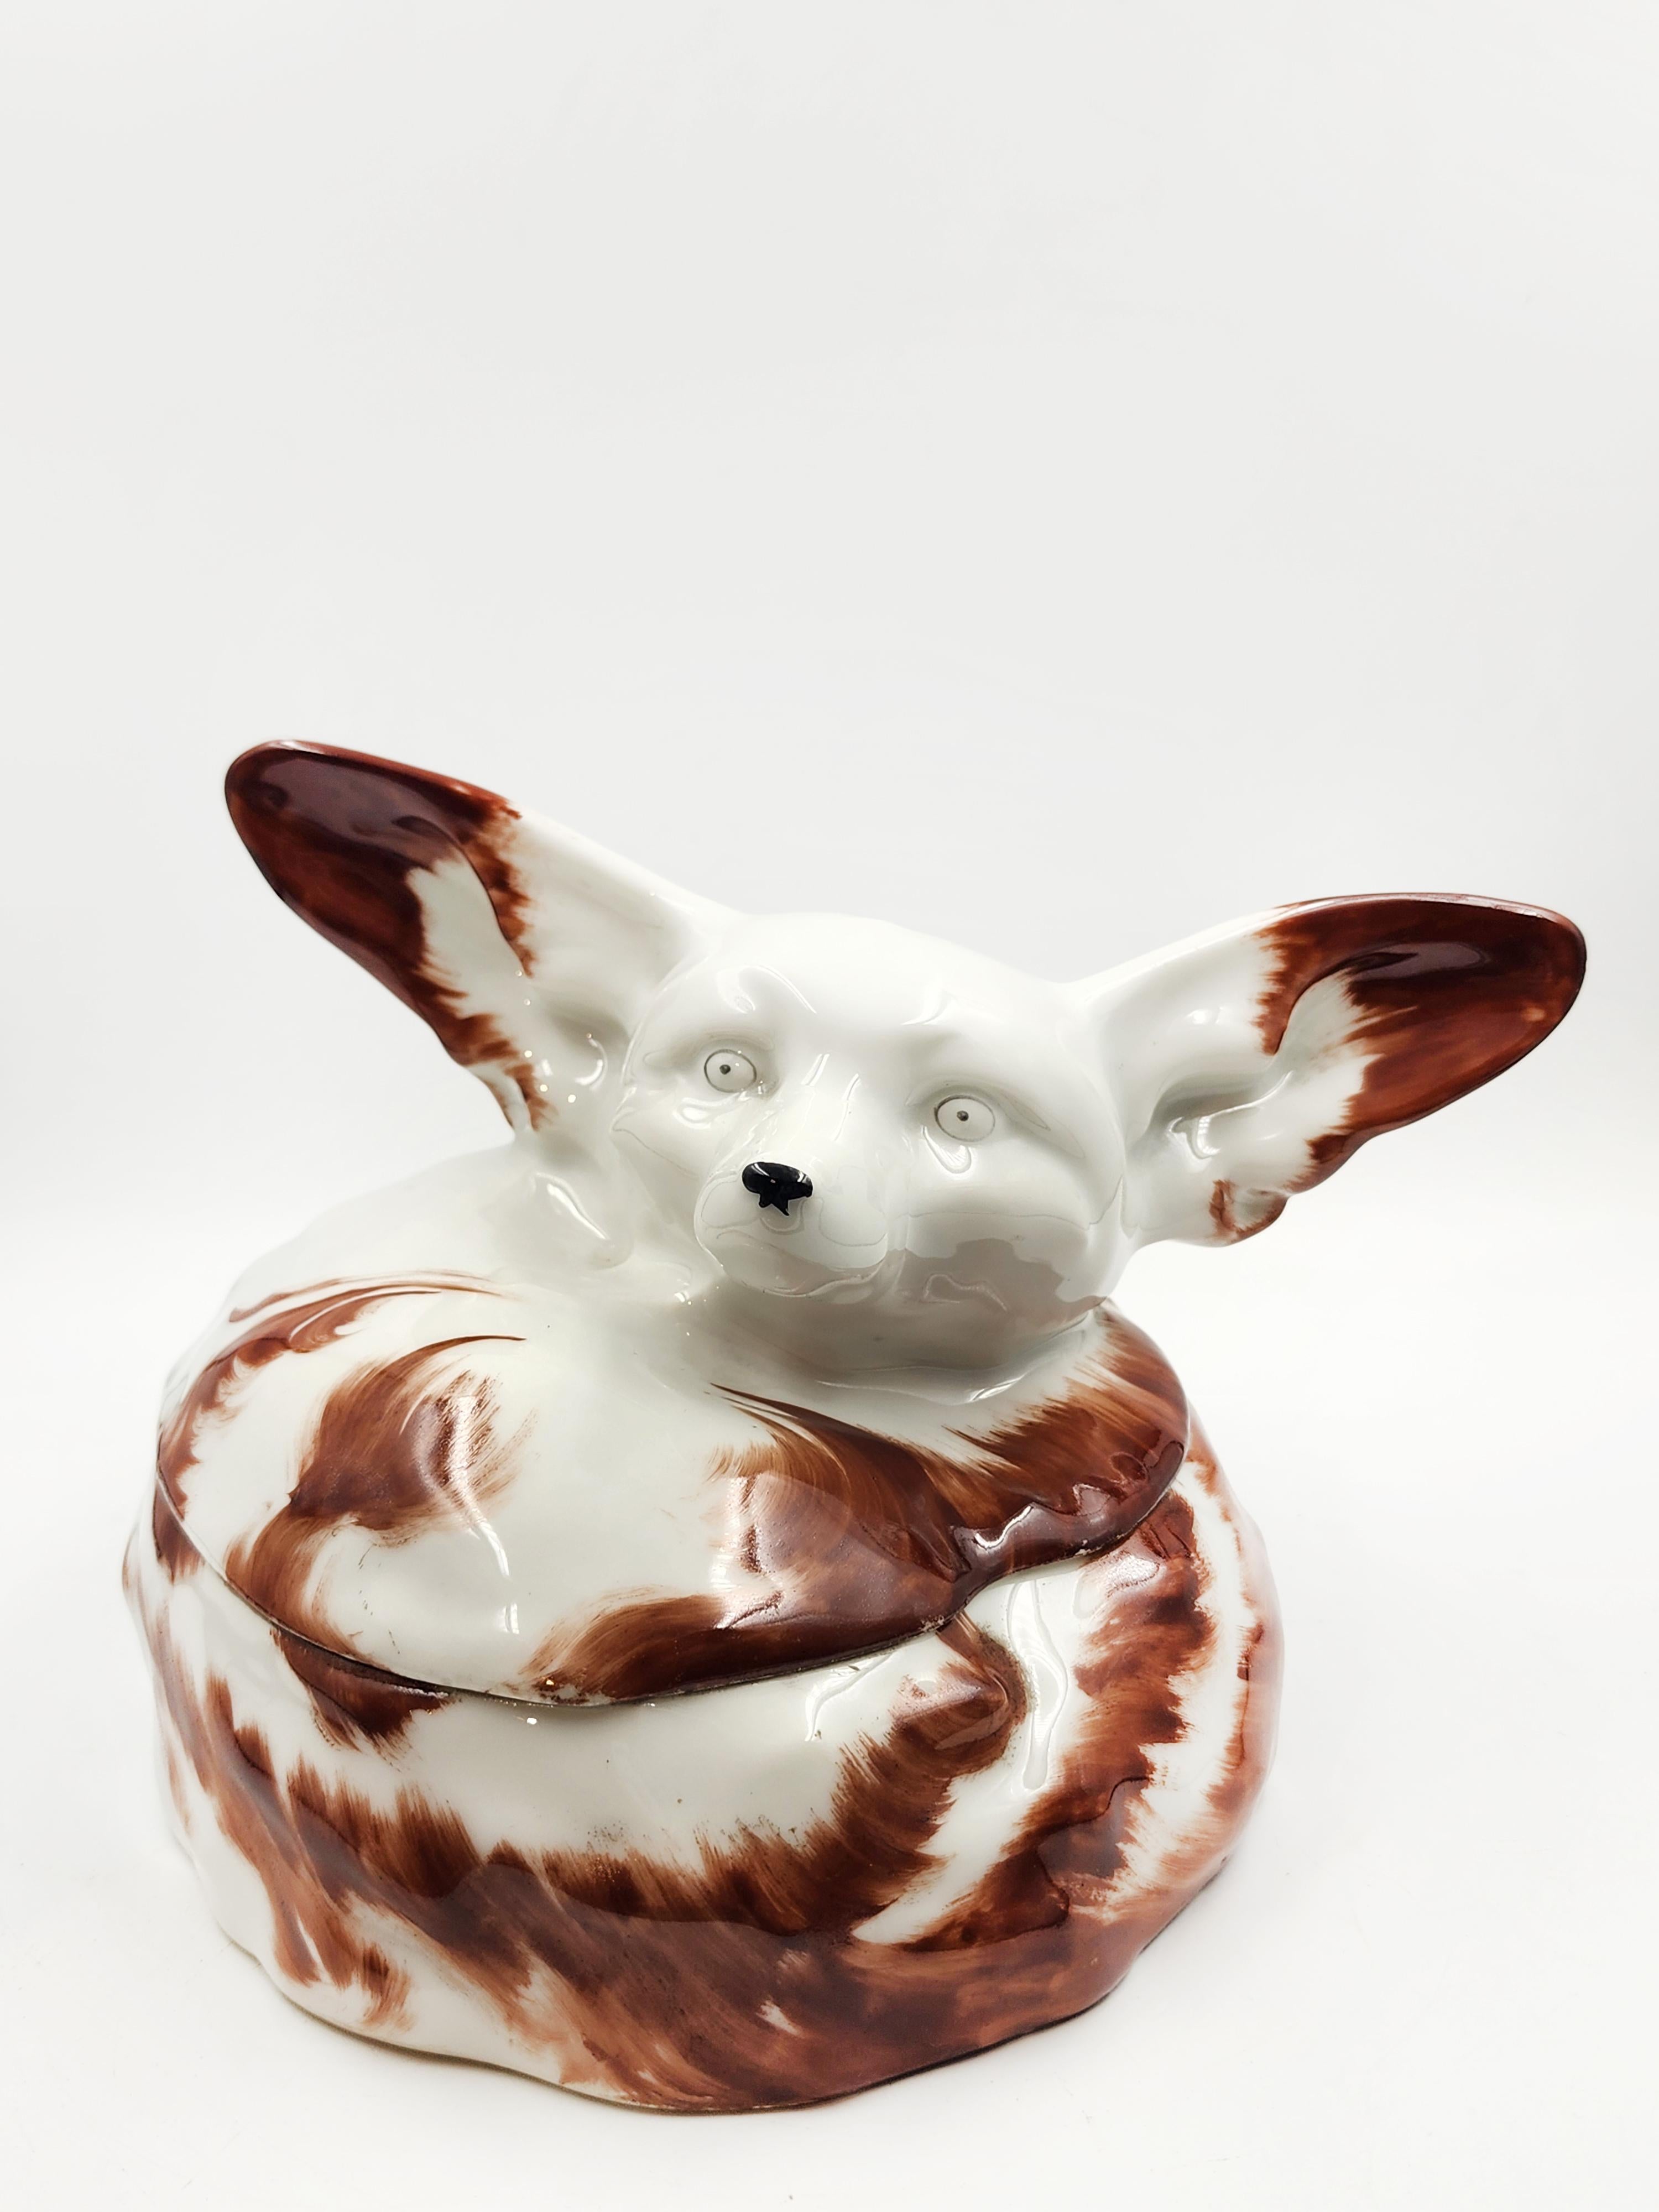 Porcelain box by Édouard-Marcel SANDOZ
Beautiful porcelain box representing a Fennec fox in white with brown spots, Made by Théodore Haviland Porcelain, the model was created in 1921 by the great Swiss sculptor Édouard-Marcel Sandoz
Signed E. A. M.